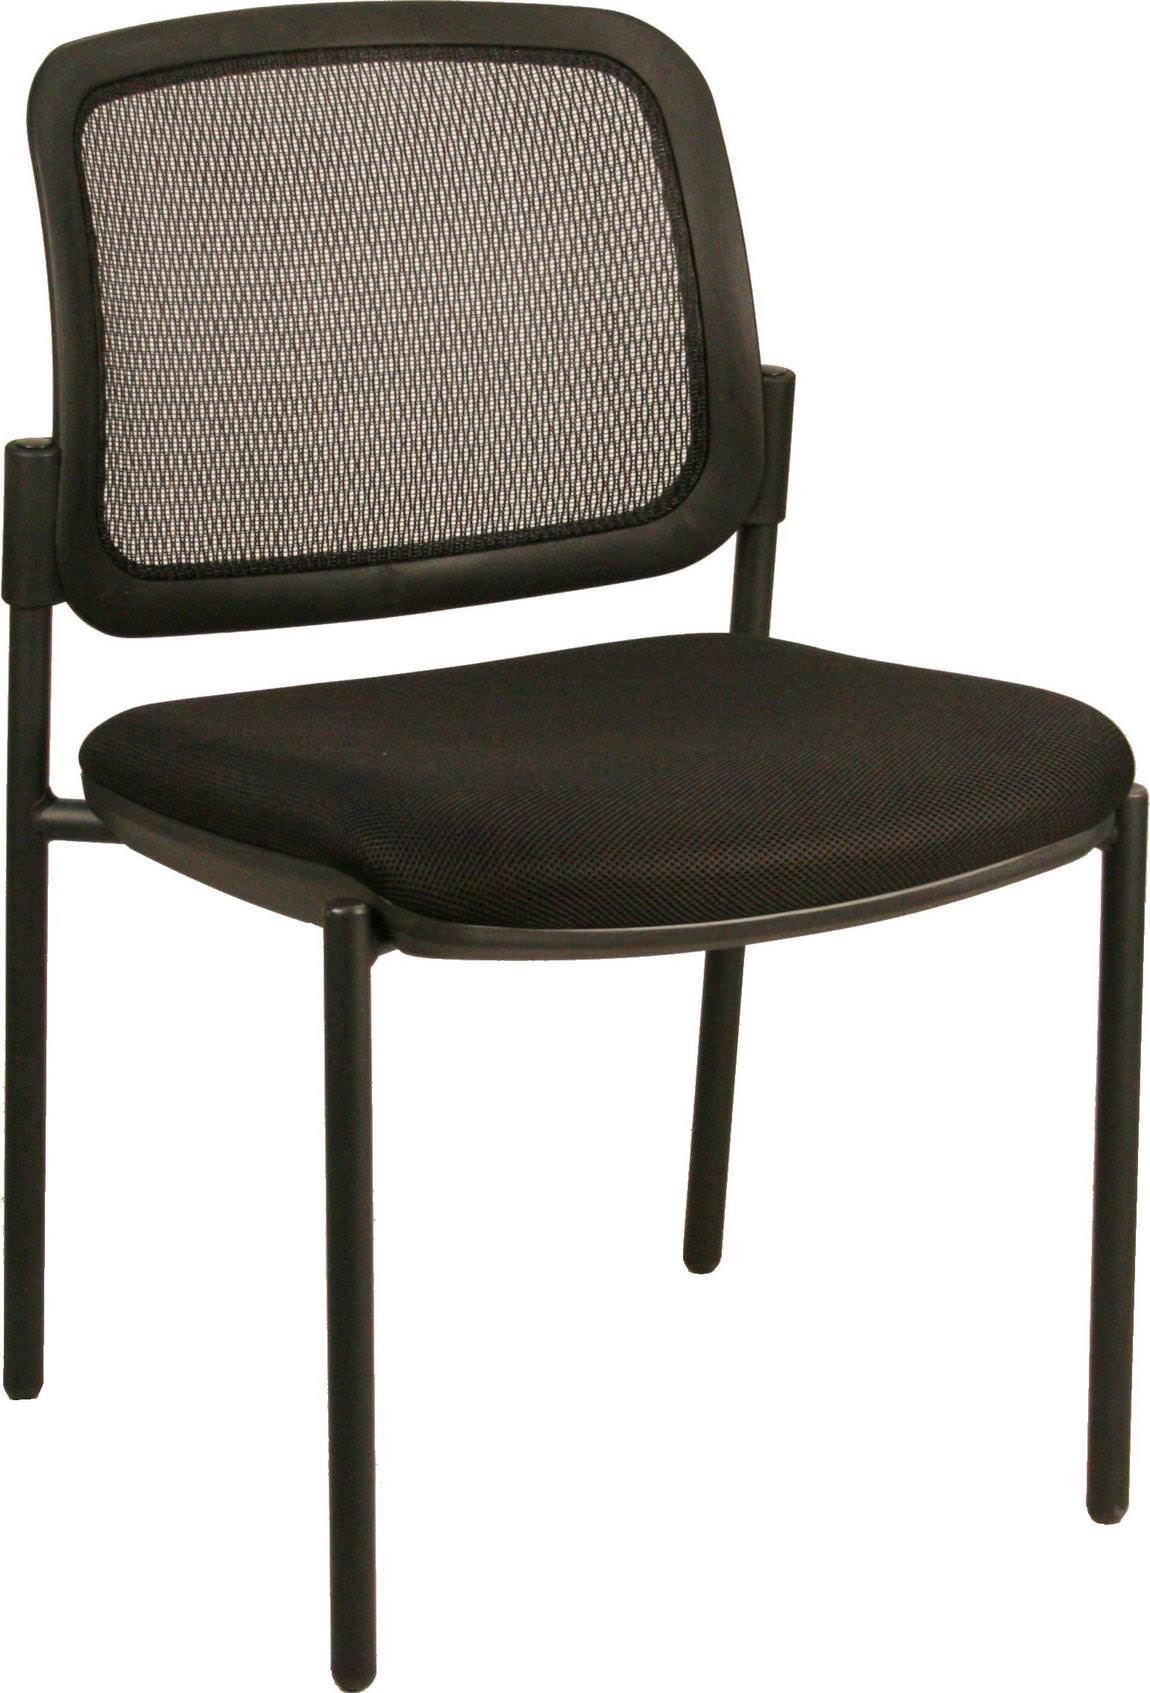 Armless Guest Chair with Fabric Seat and Mesh Back